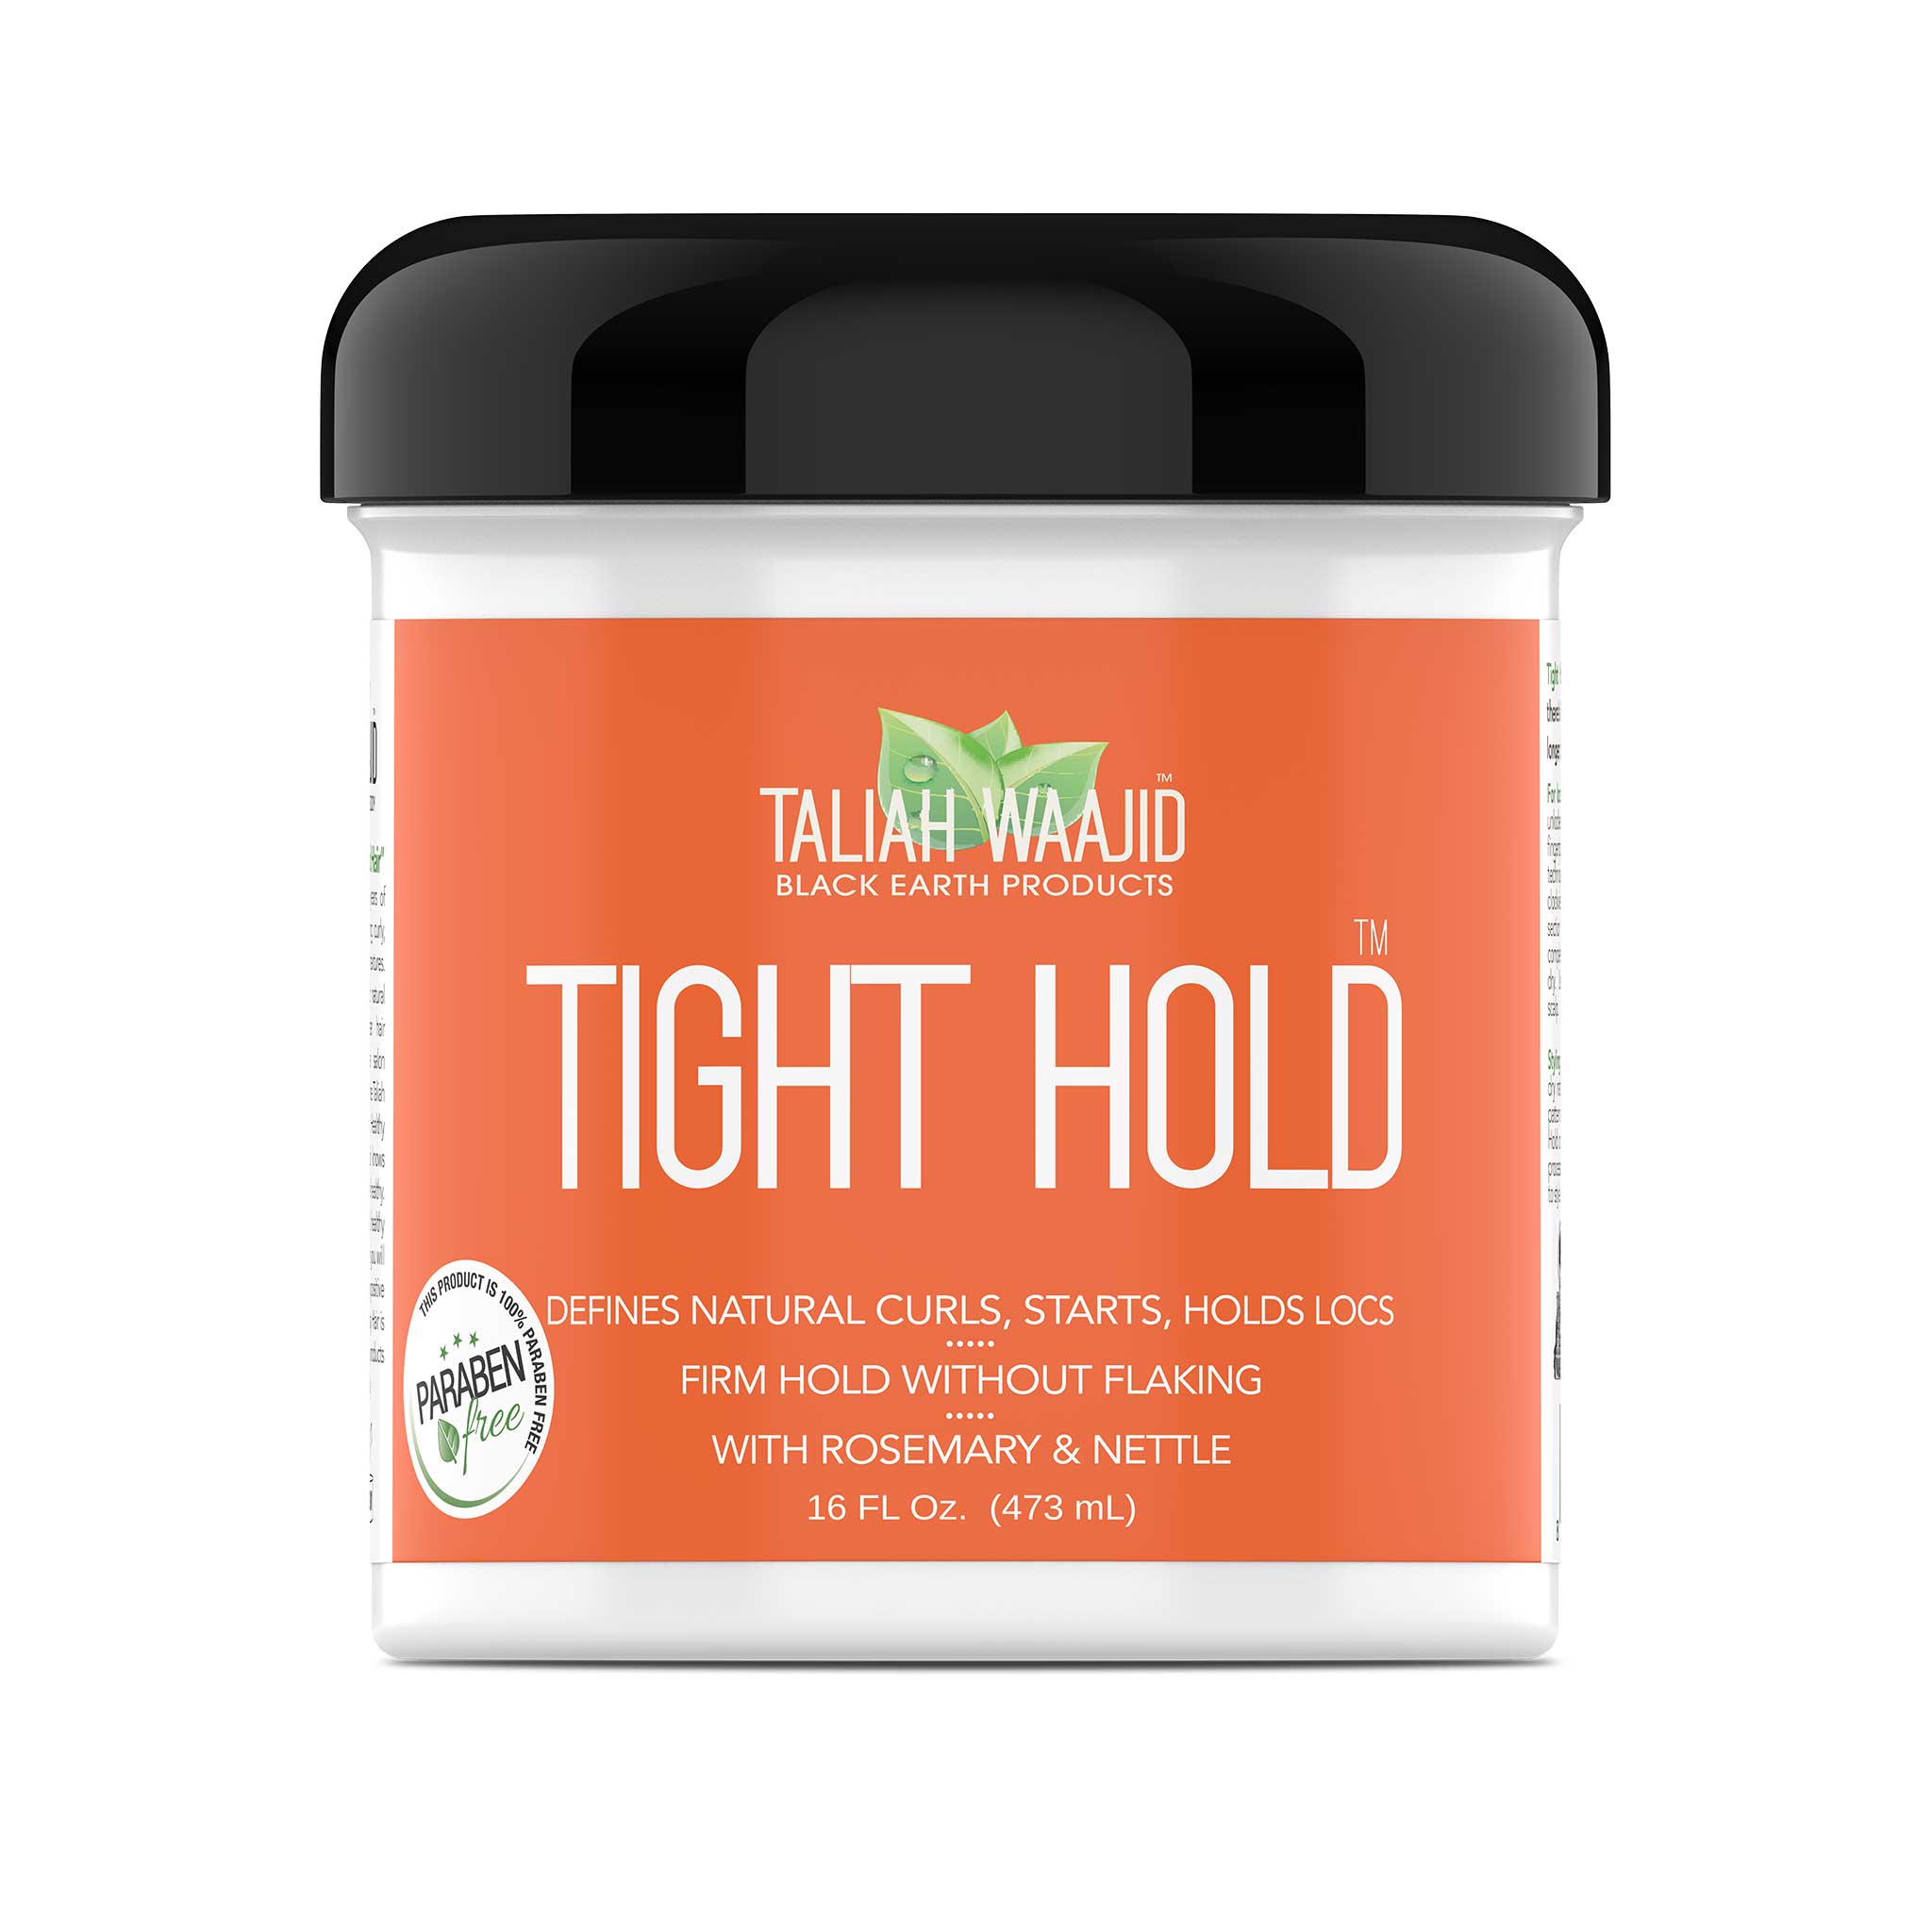 Black Earth Products Tight Hold 16oz